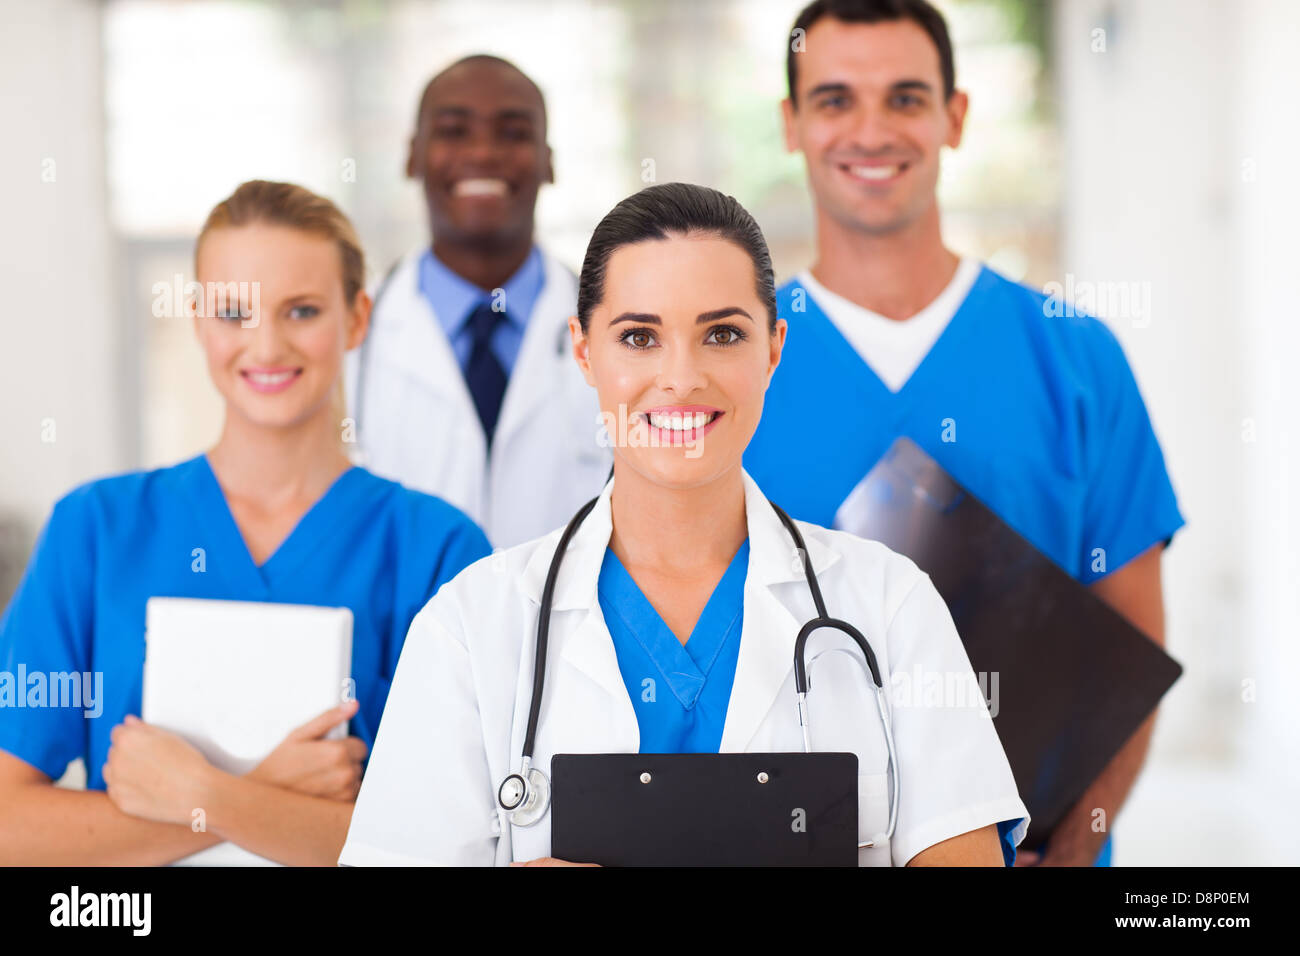 group of healthcare professionals in hospital Stock Photo